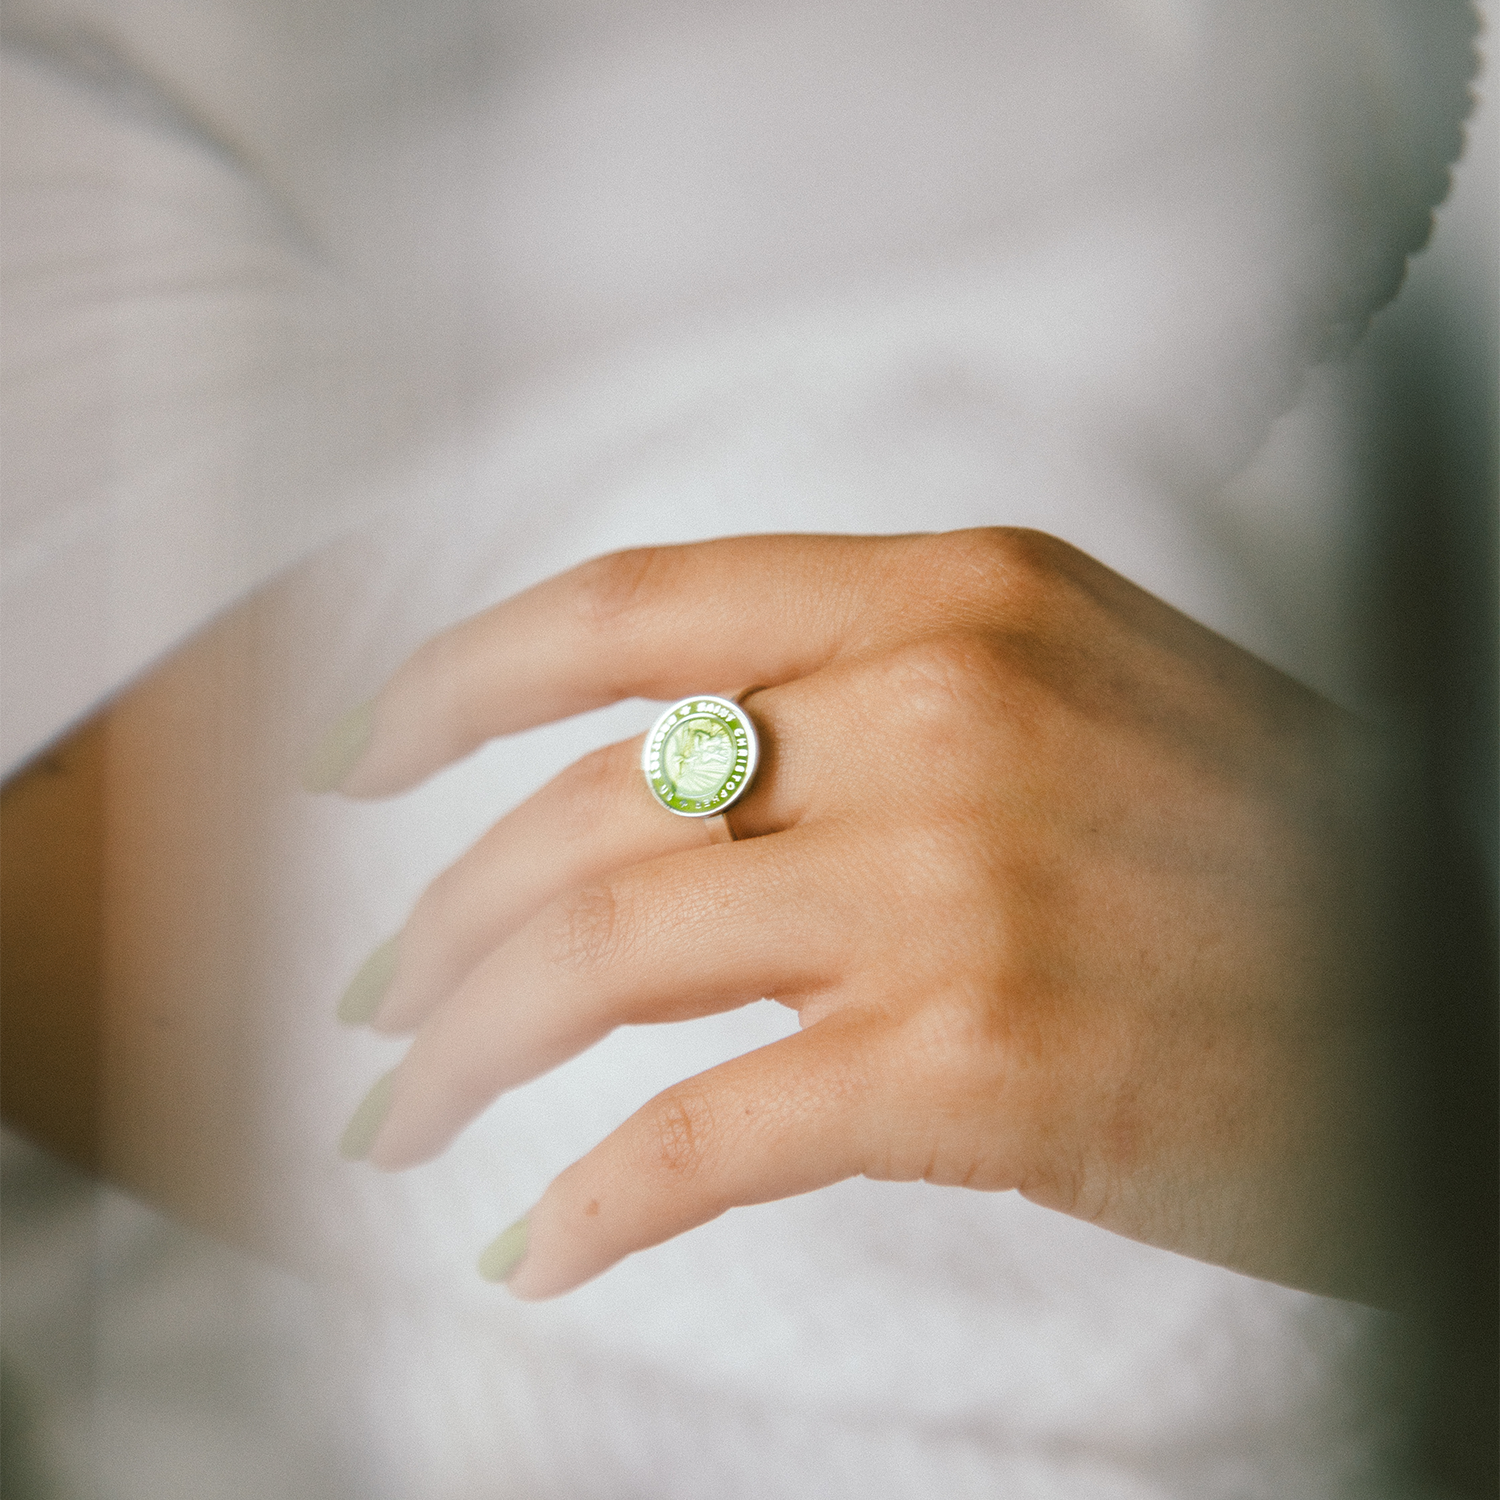 St. Christopher Ring in Green Cactus // Get Back Necklaces